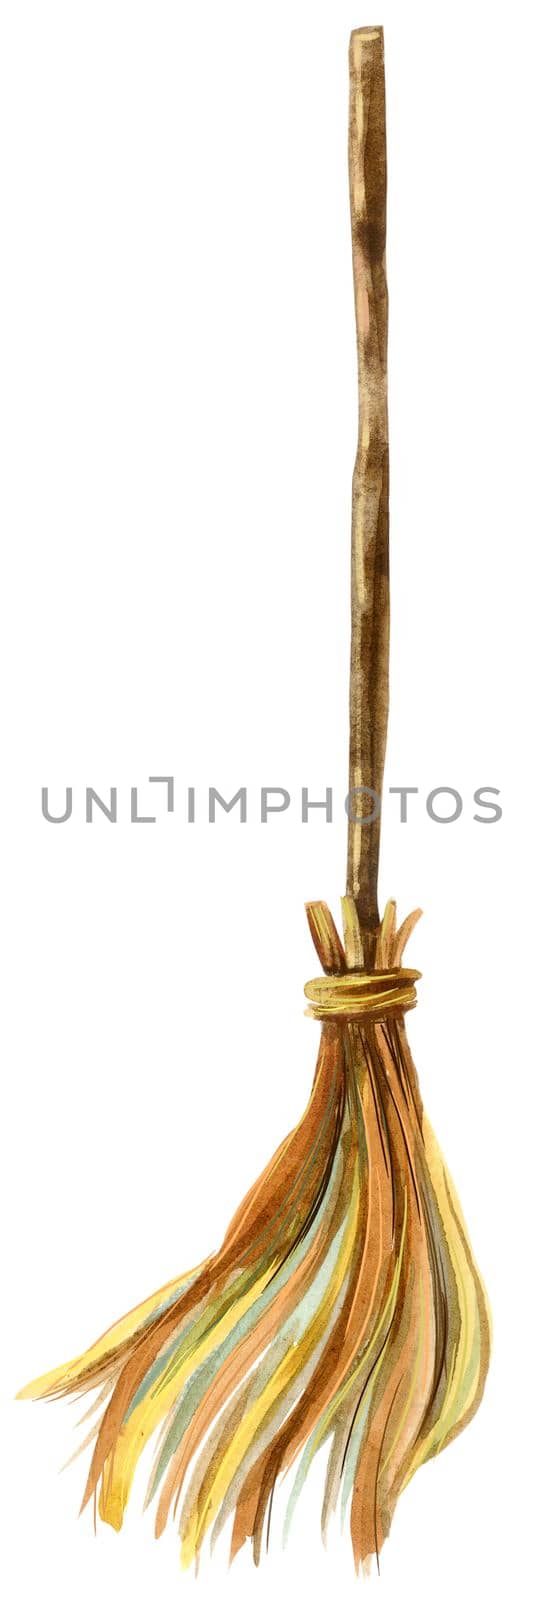 Cute watercolor Witches broom stick illustration isolated on white background. Old broom. Halloween accessory object. Perfect for Happy Halloween holiday